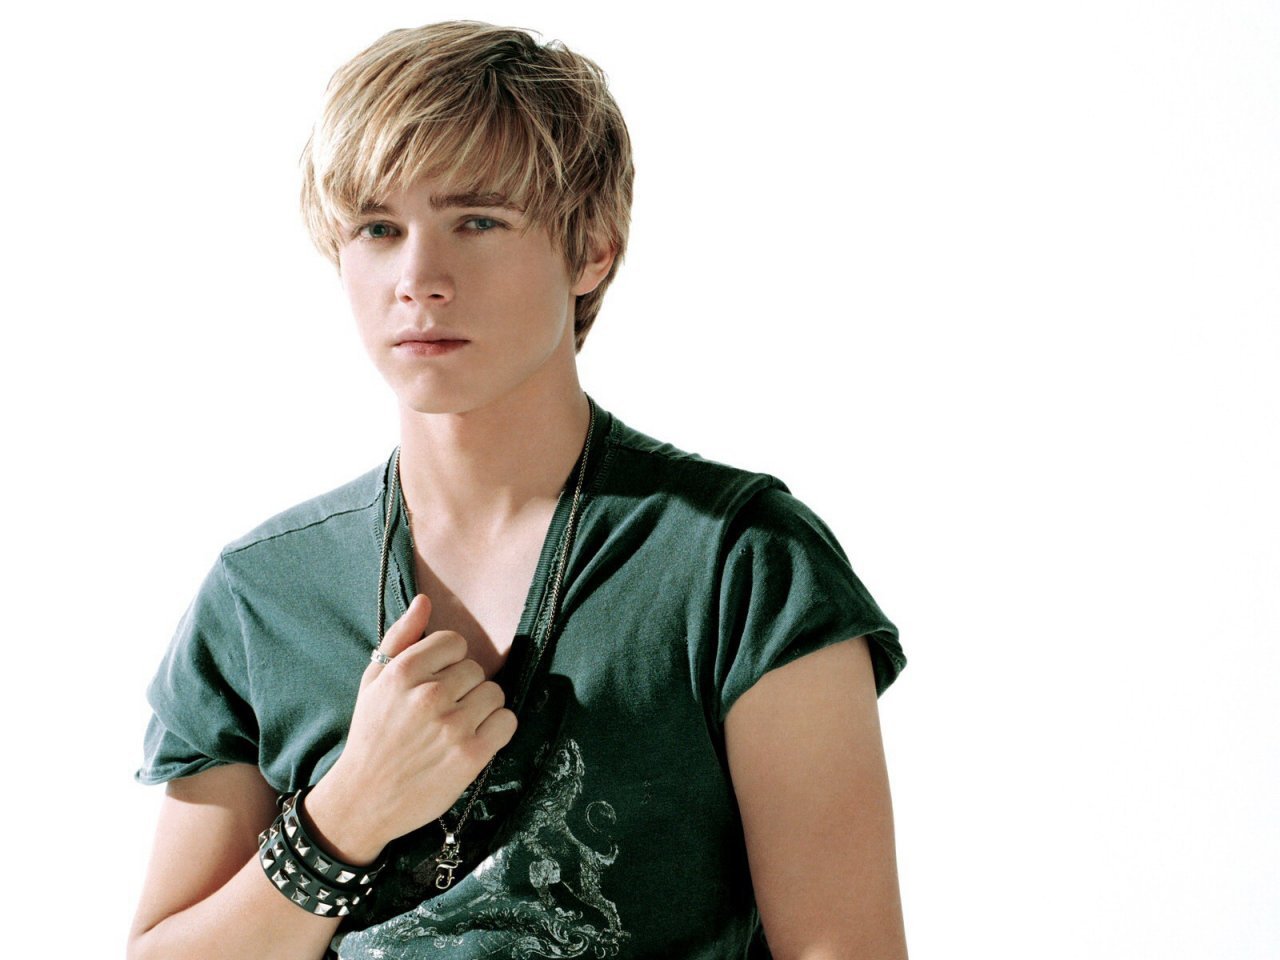 Pictures of Jesse McCartney - Pictures Of Celebrities1280 x 960